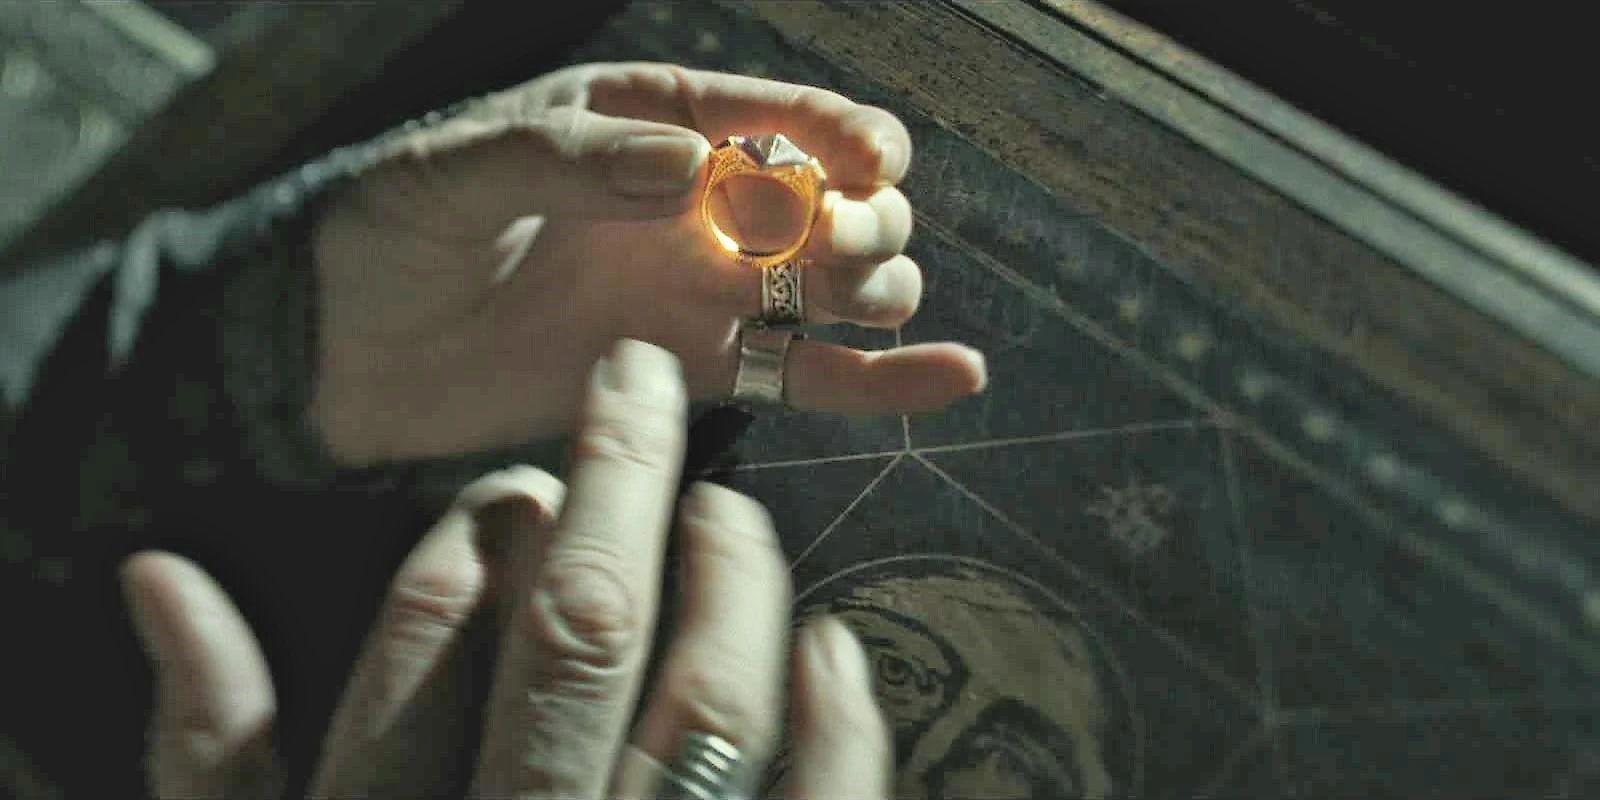 dumbledore trying on marvolo gaunt's ring